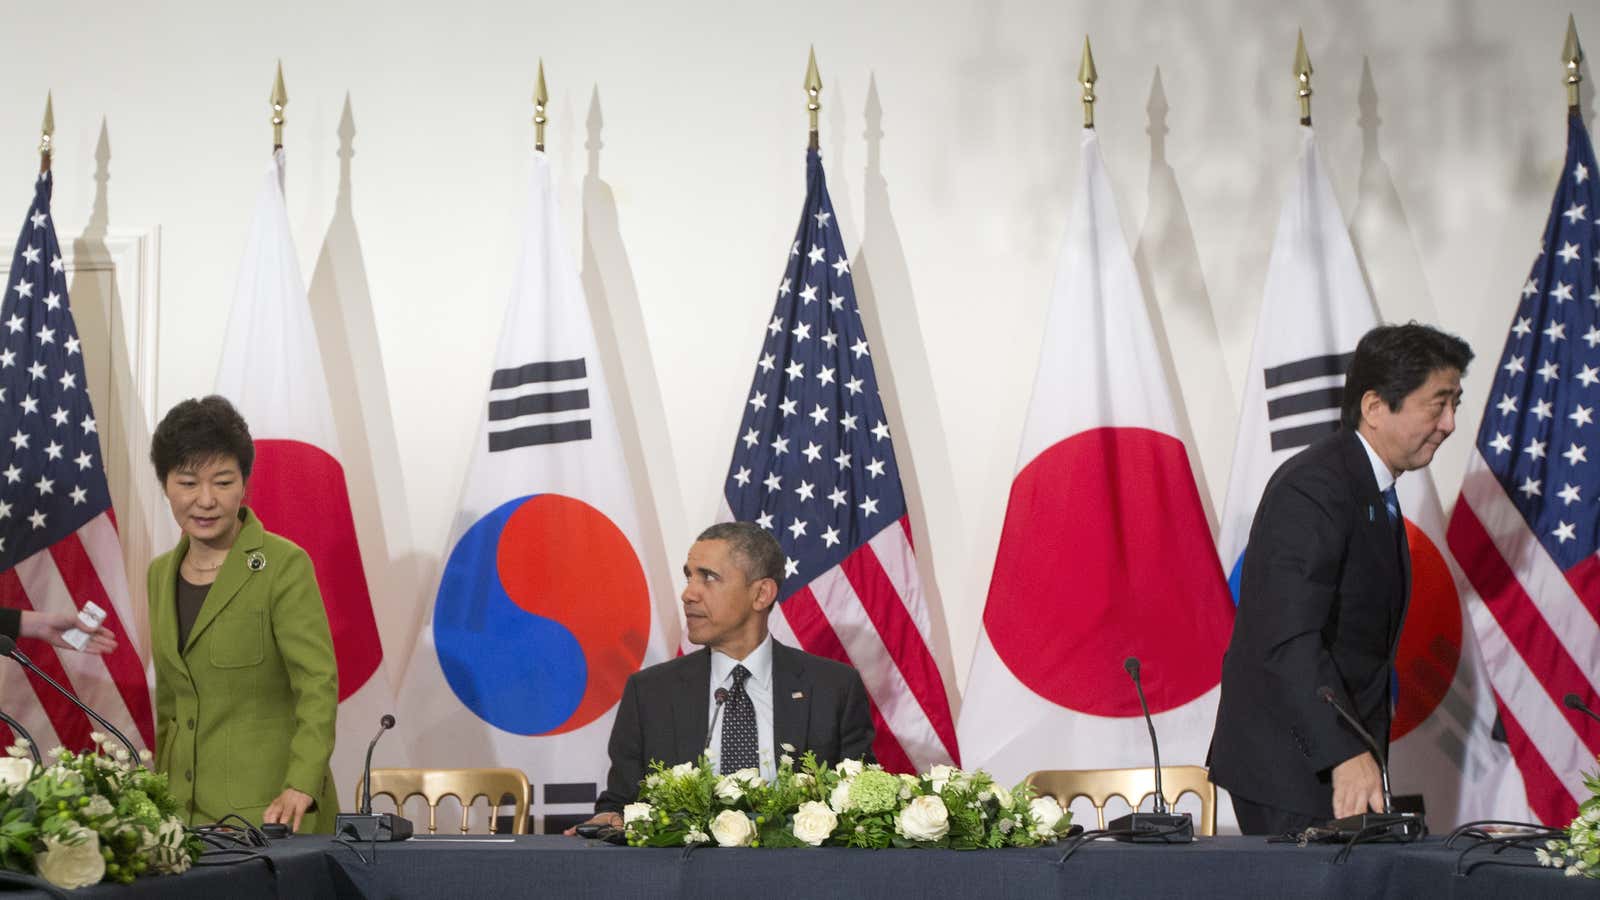 US president Barack Obama, center, watches South Korean president Park Geun-hye, left, and Japanese prime minister Shinzo Abe, right, move to their seats at the opposite ends of the table to start their trilateral meeting in March 2014.